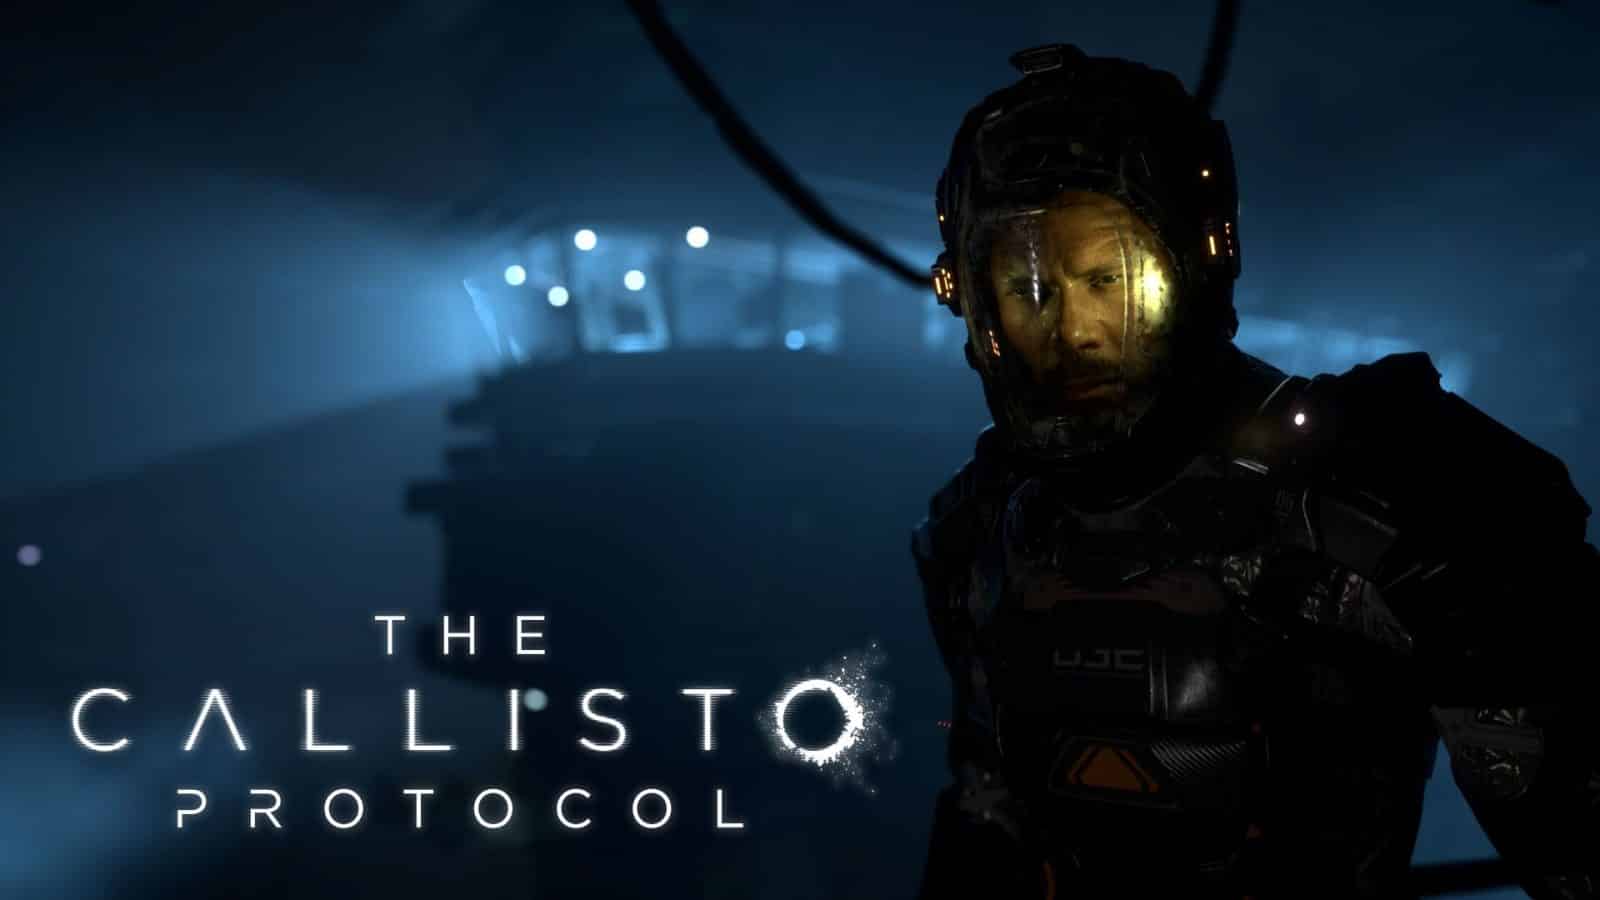 The Callisto Protocol was a breath of fresh air among all the